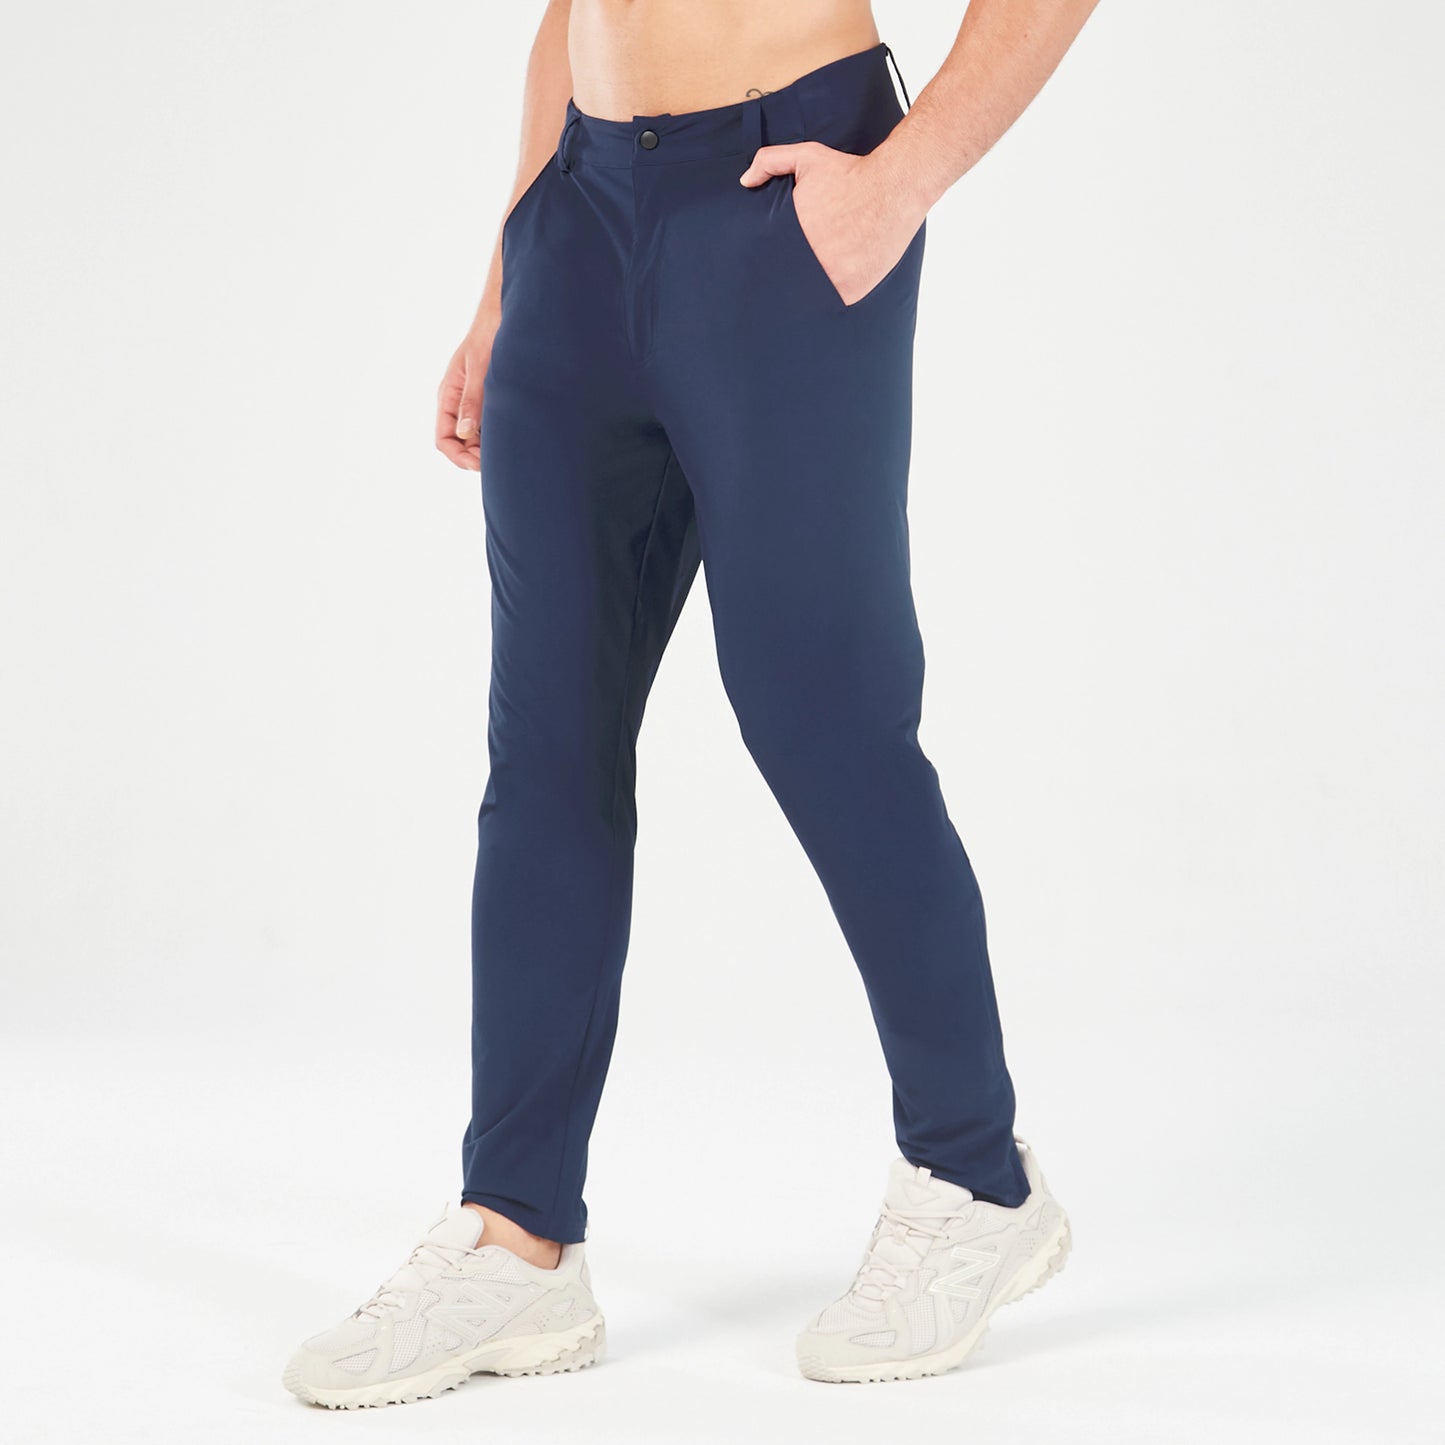 AE | Statement Ribbed Smart Pants - Navy | Gym Pants | SQUATWOLF